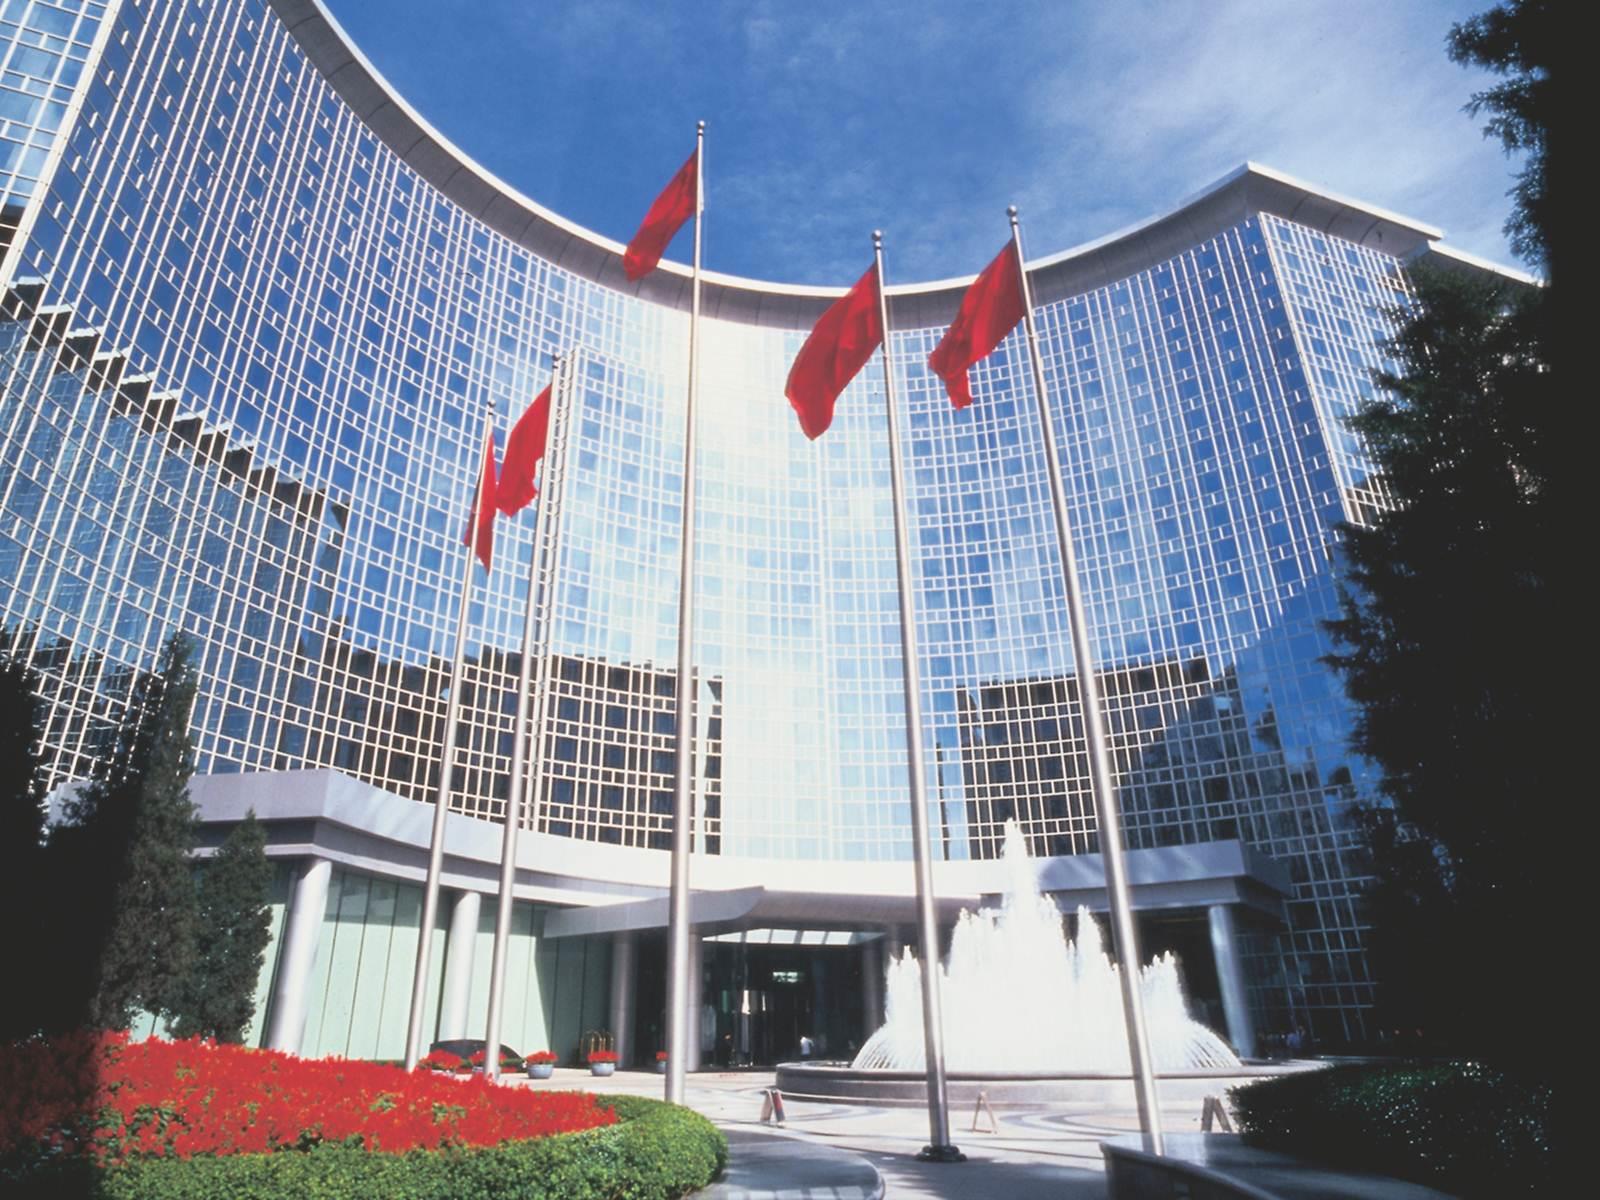 Grand Hyatt Beijing Hotel Beijing FAQ 2016, What facilities are there in Grand Hyatt Beijing Hotel Beijing 2016, What Languages Spoken are Supported in Grand Hyatt Beijing Hotel Beijing 2016, Which payment cards are accepted in Grand Hyatt Beijing Hotel Beijing , Beijing Grand Hyatt Beijing Hotel room facilities and services Q&A 2016, Beijing Grand Hyatt Beijing Hotel online booking services 2016, Beijing Grand Hyatt Beijing Hotel address 2016, Beijing Grand Hyatt Beijing Hotel telephone number 2016,Beijing Grand Hyatt Beijing Hotel map 2016, Beijing Grand Hyatt Beijing Hotel traffic guide 2016, how to go Beijing Grand Hyatt Beijing Hotel, Beijing Grand Hyatt Beijing Hotel booking online 2016, Beijing Grand Hyatt Beijing Hotel room types 2016.